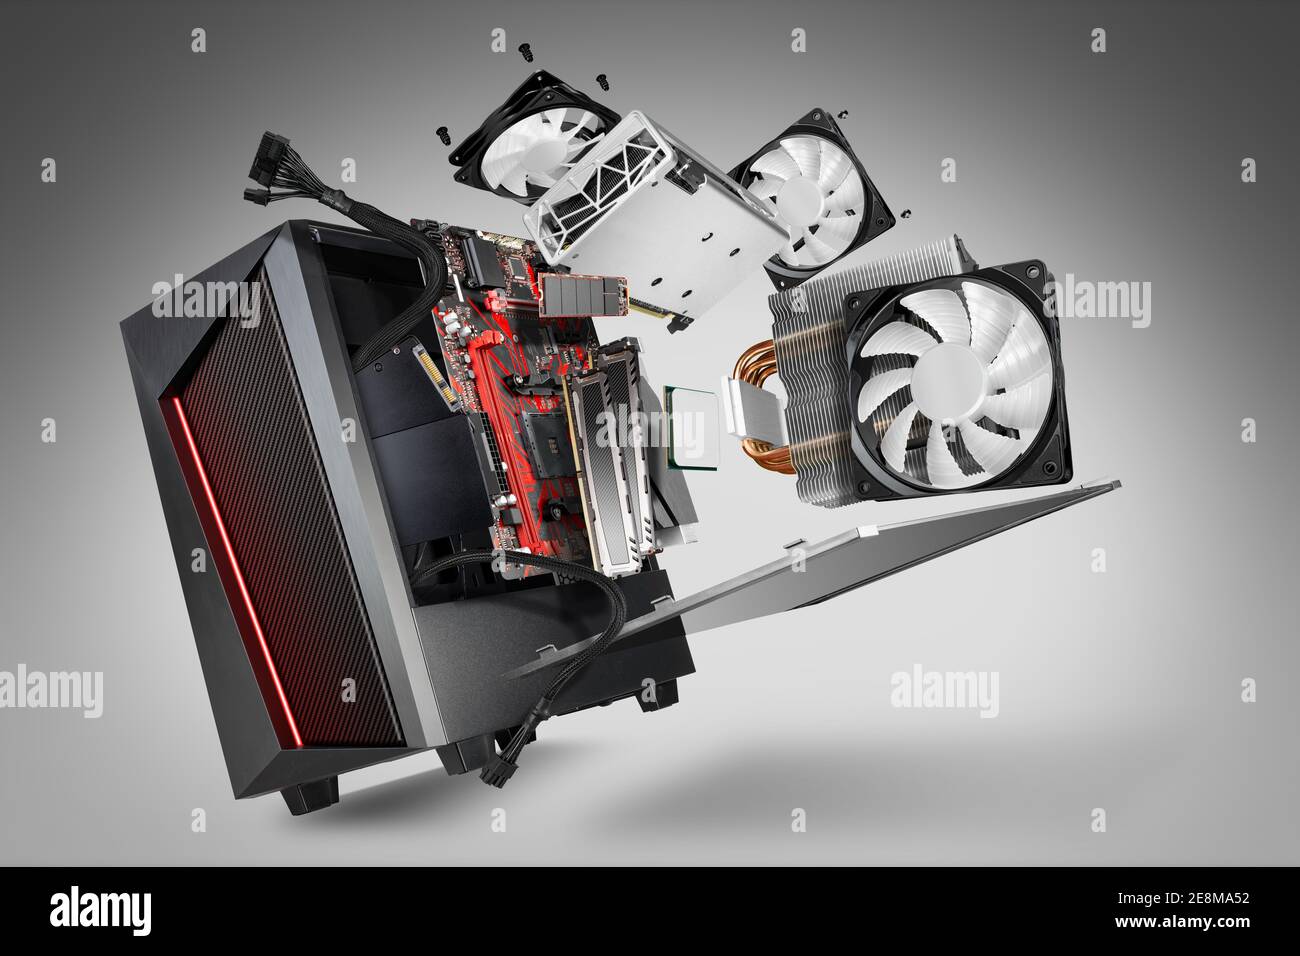 exploded view of a modern computer. hardware components mainboard cpu processor graphic card RAM cables and cooling fan flying out of black red PC cas Stock Photo